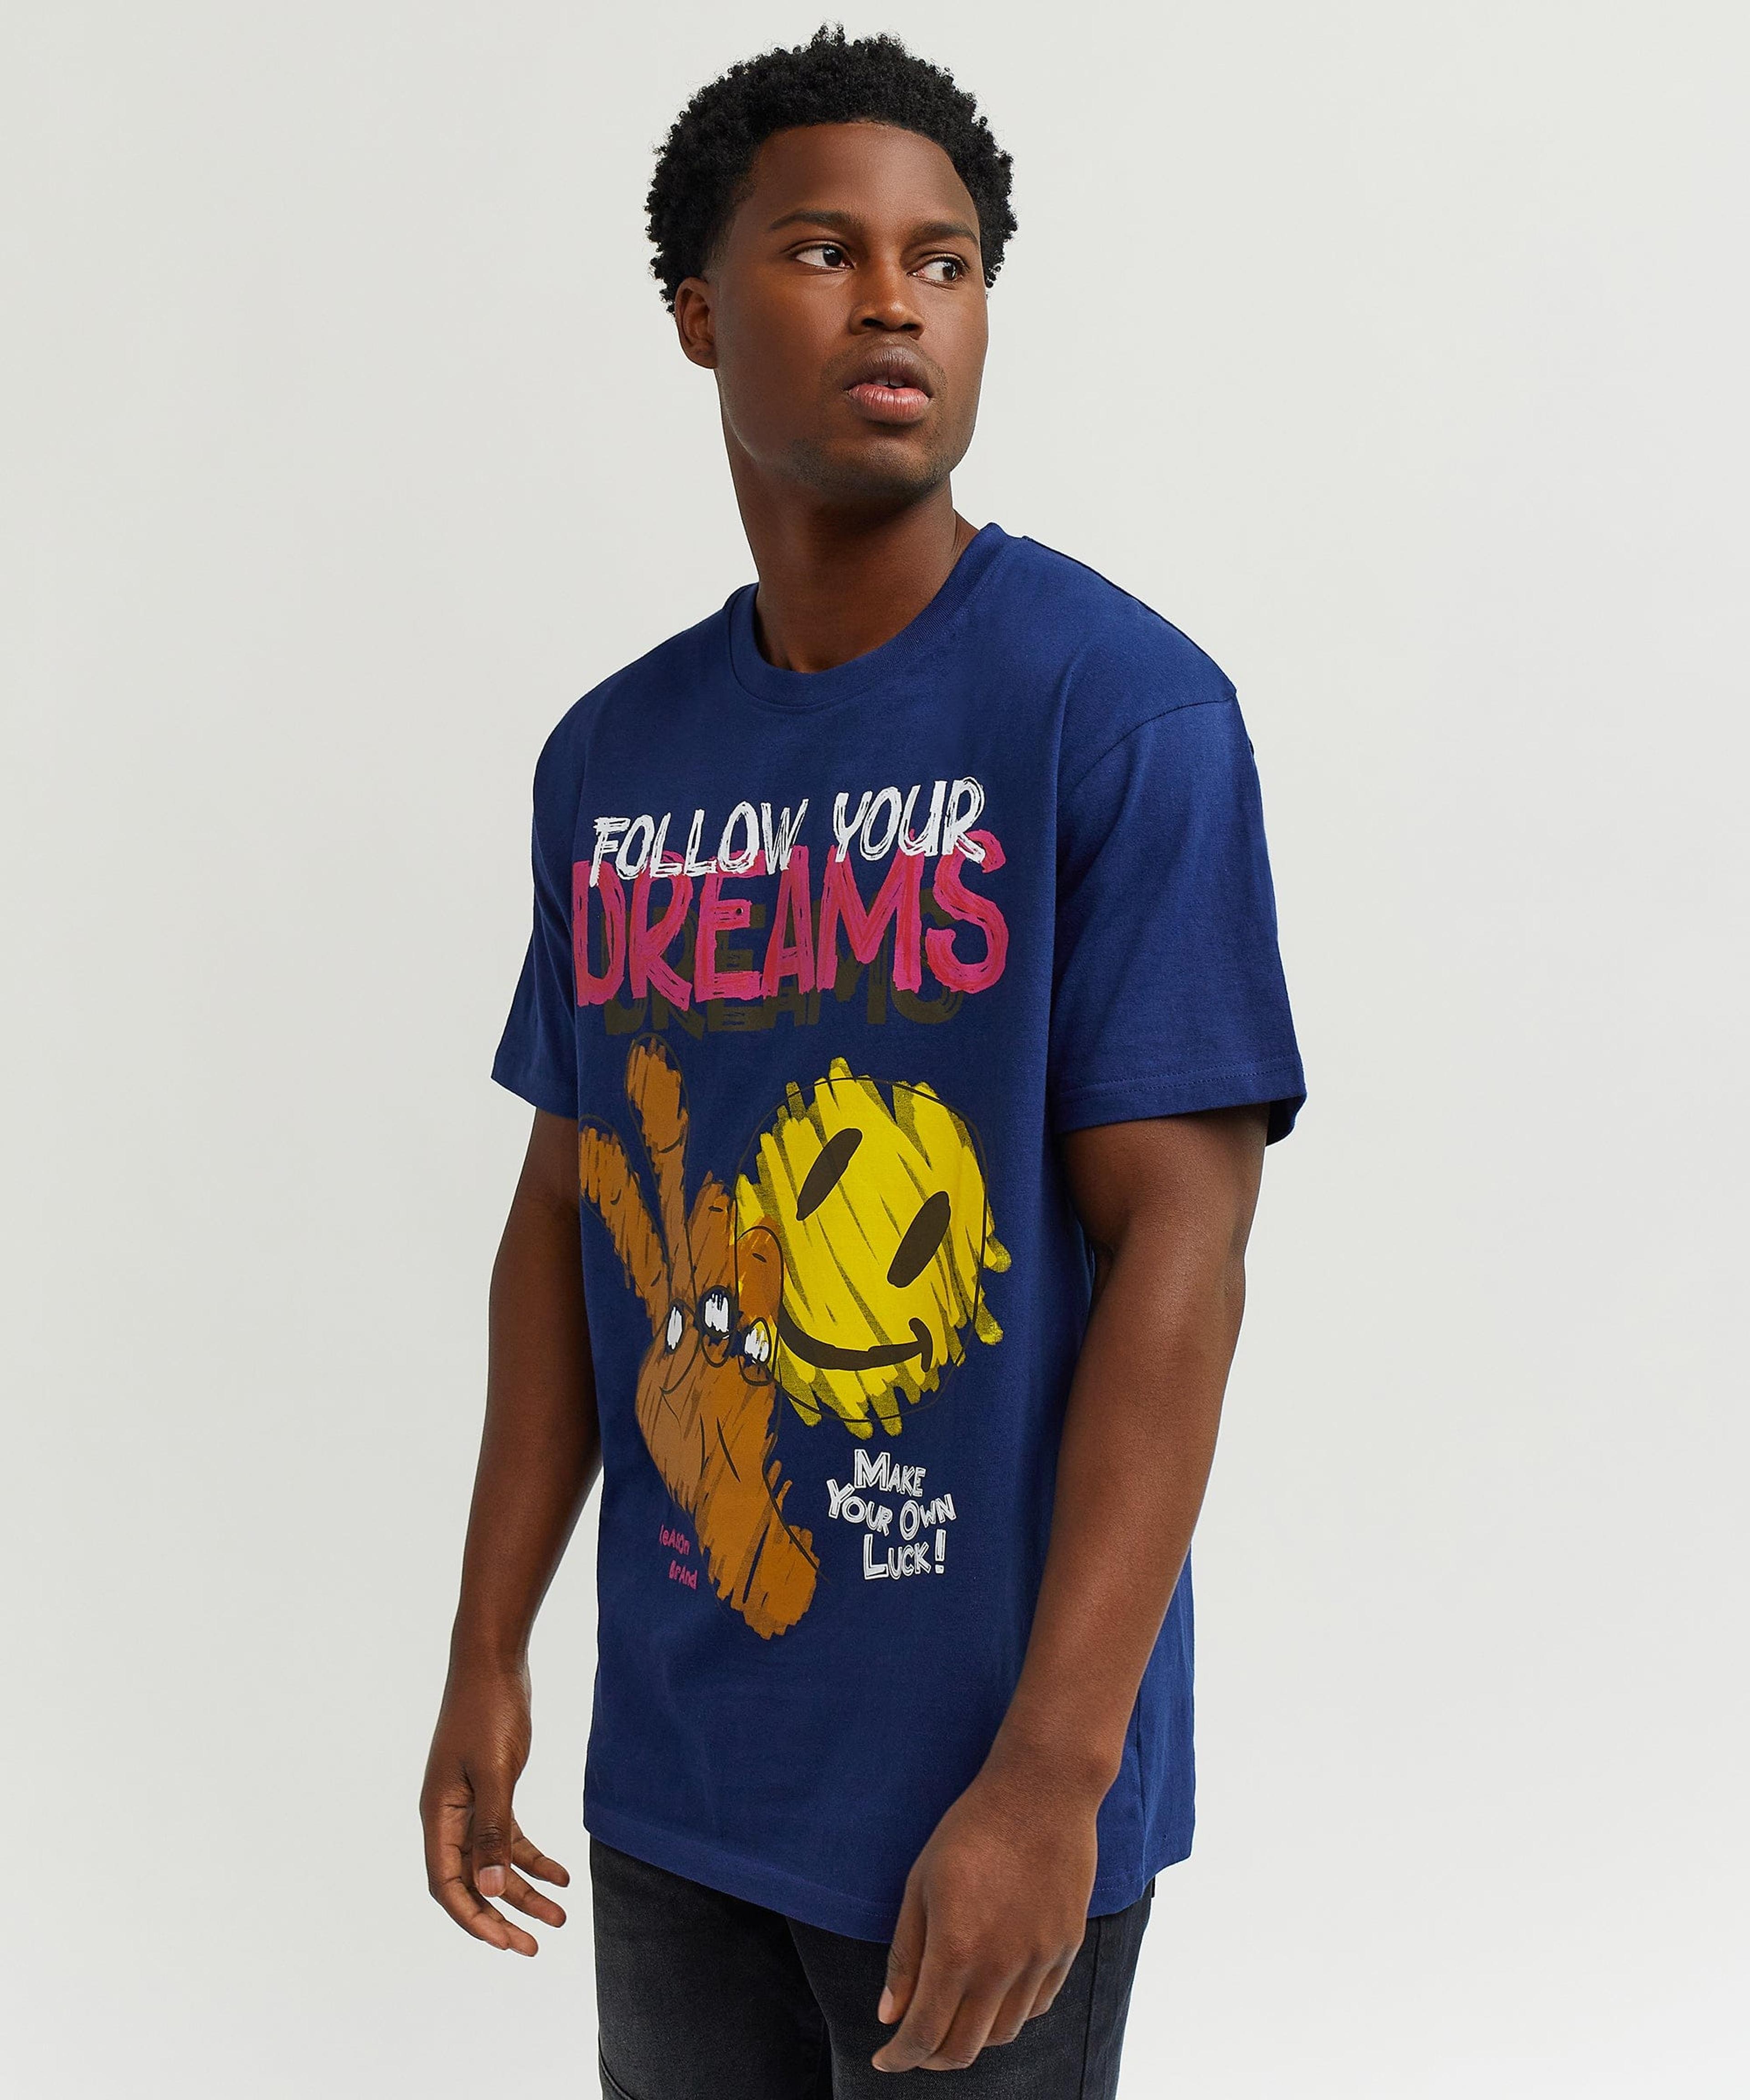 Alternate View 3 of Follow Your Dreams Short Sleeve Tee - Navy